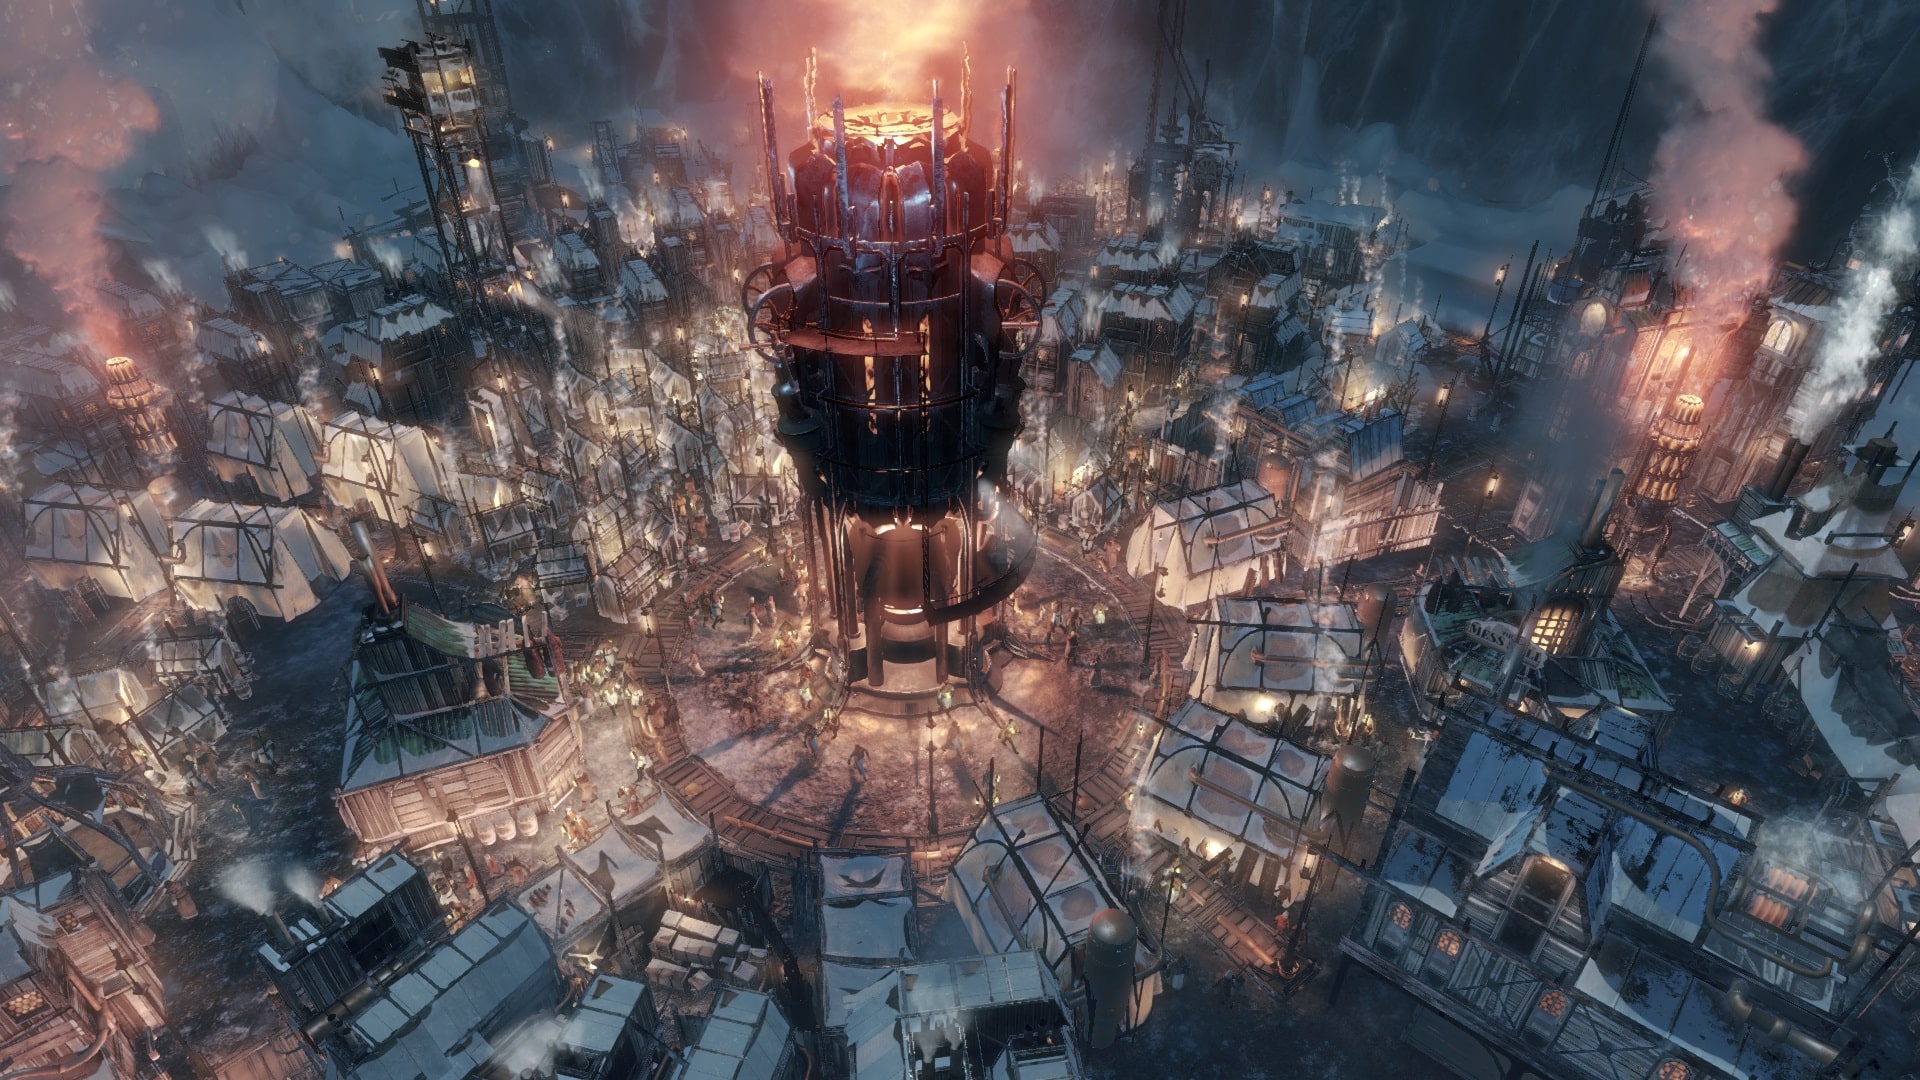 Frostpunk's resilient city against the backdrop of a frozen apocalypse